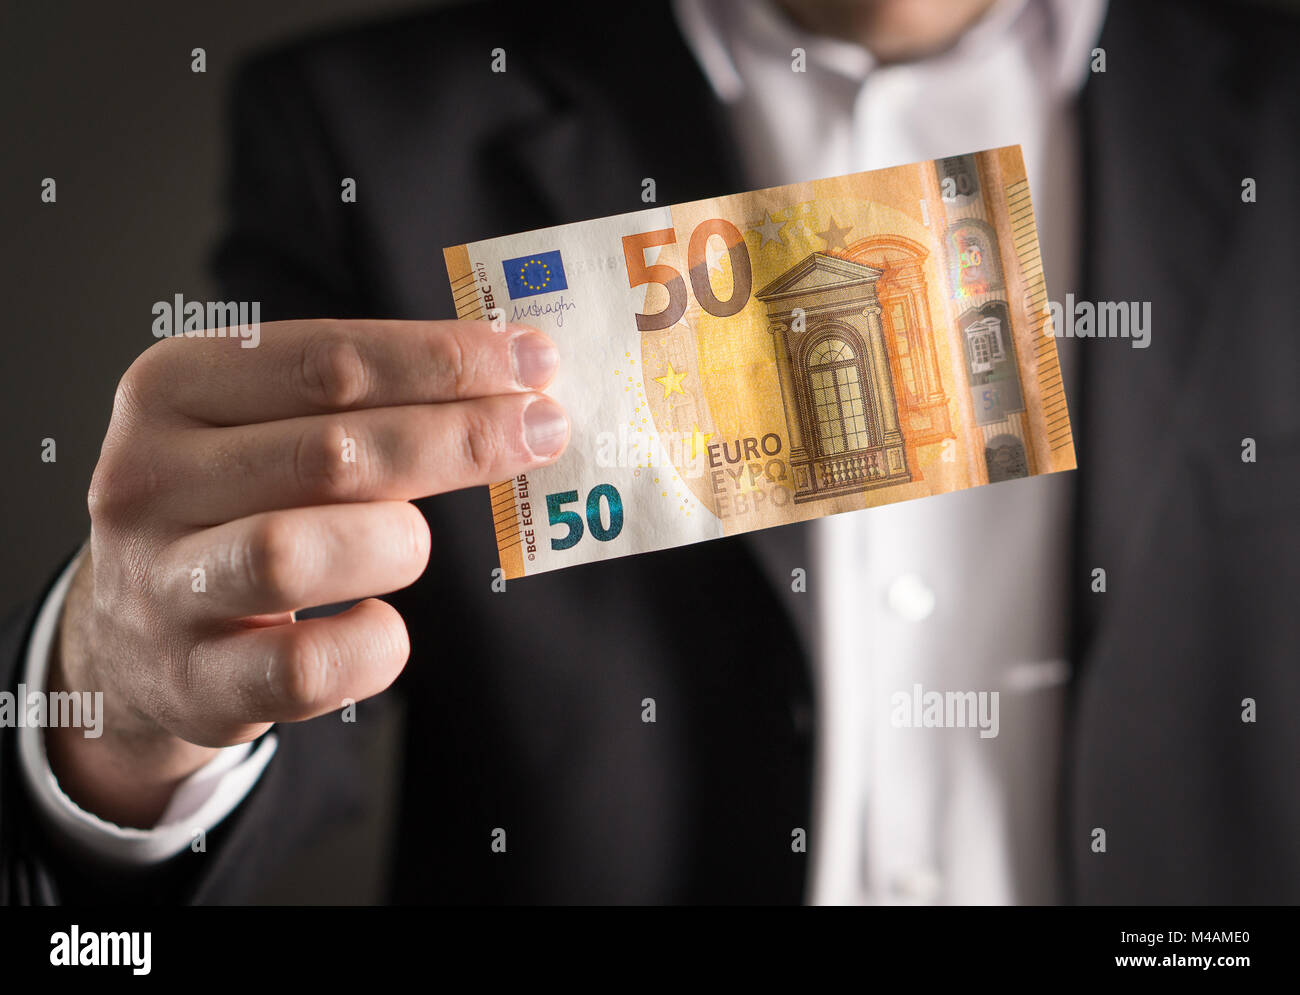 Business man in suit holding the new 50 euro banknote and bill. Stock Photo